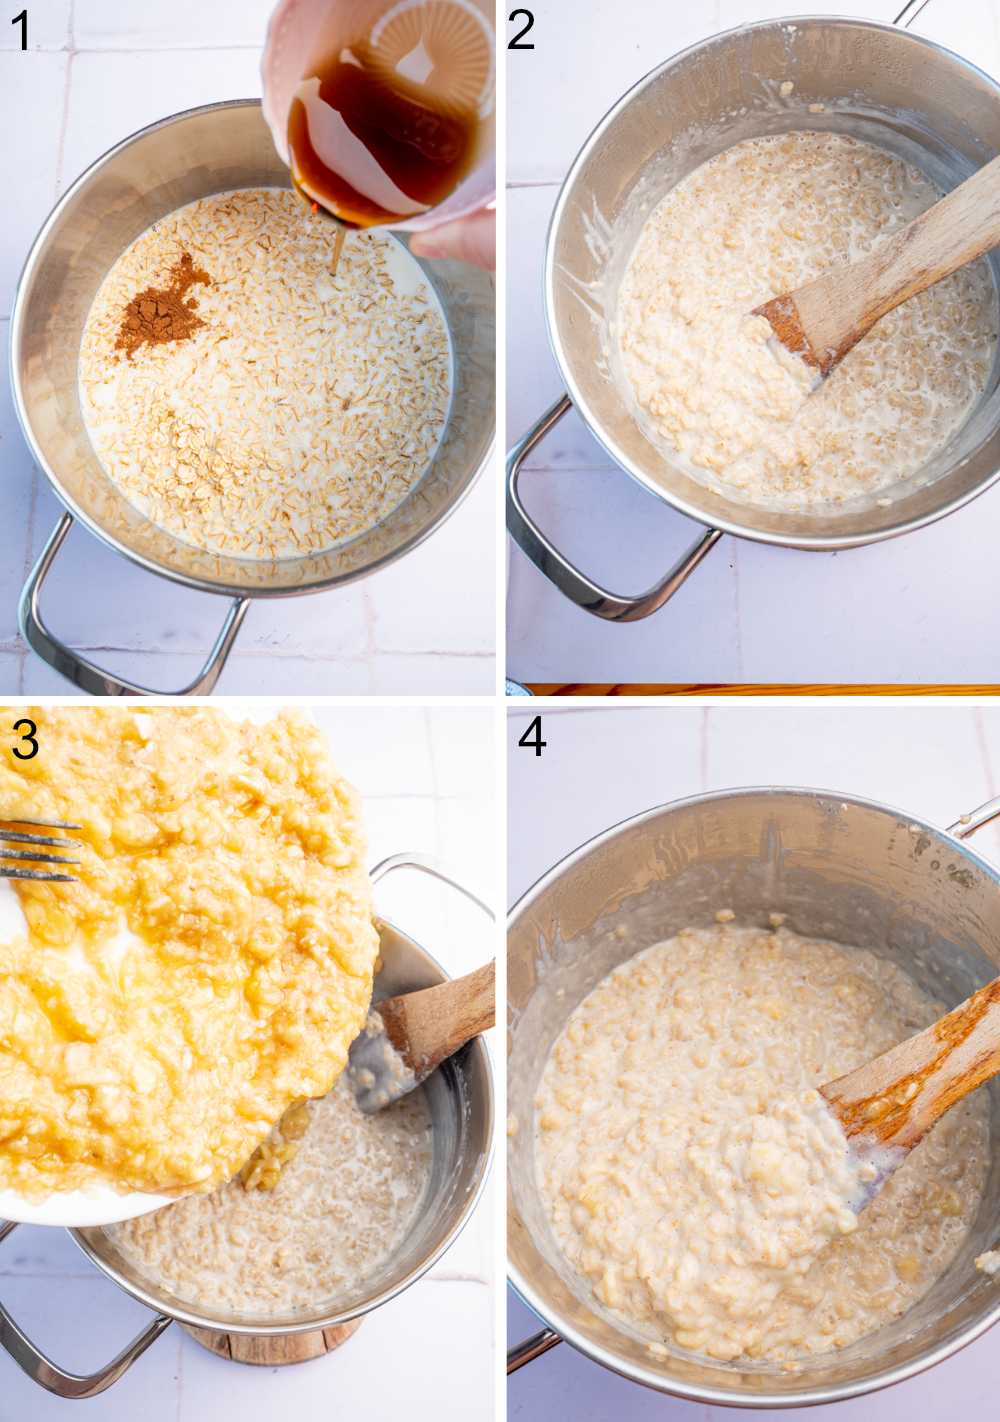 A collage of 4 photos showing how to prepare banana oatmeal step by step.